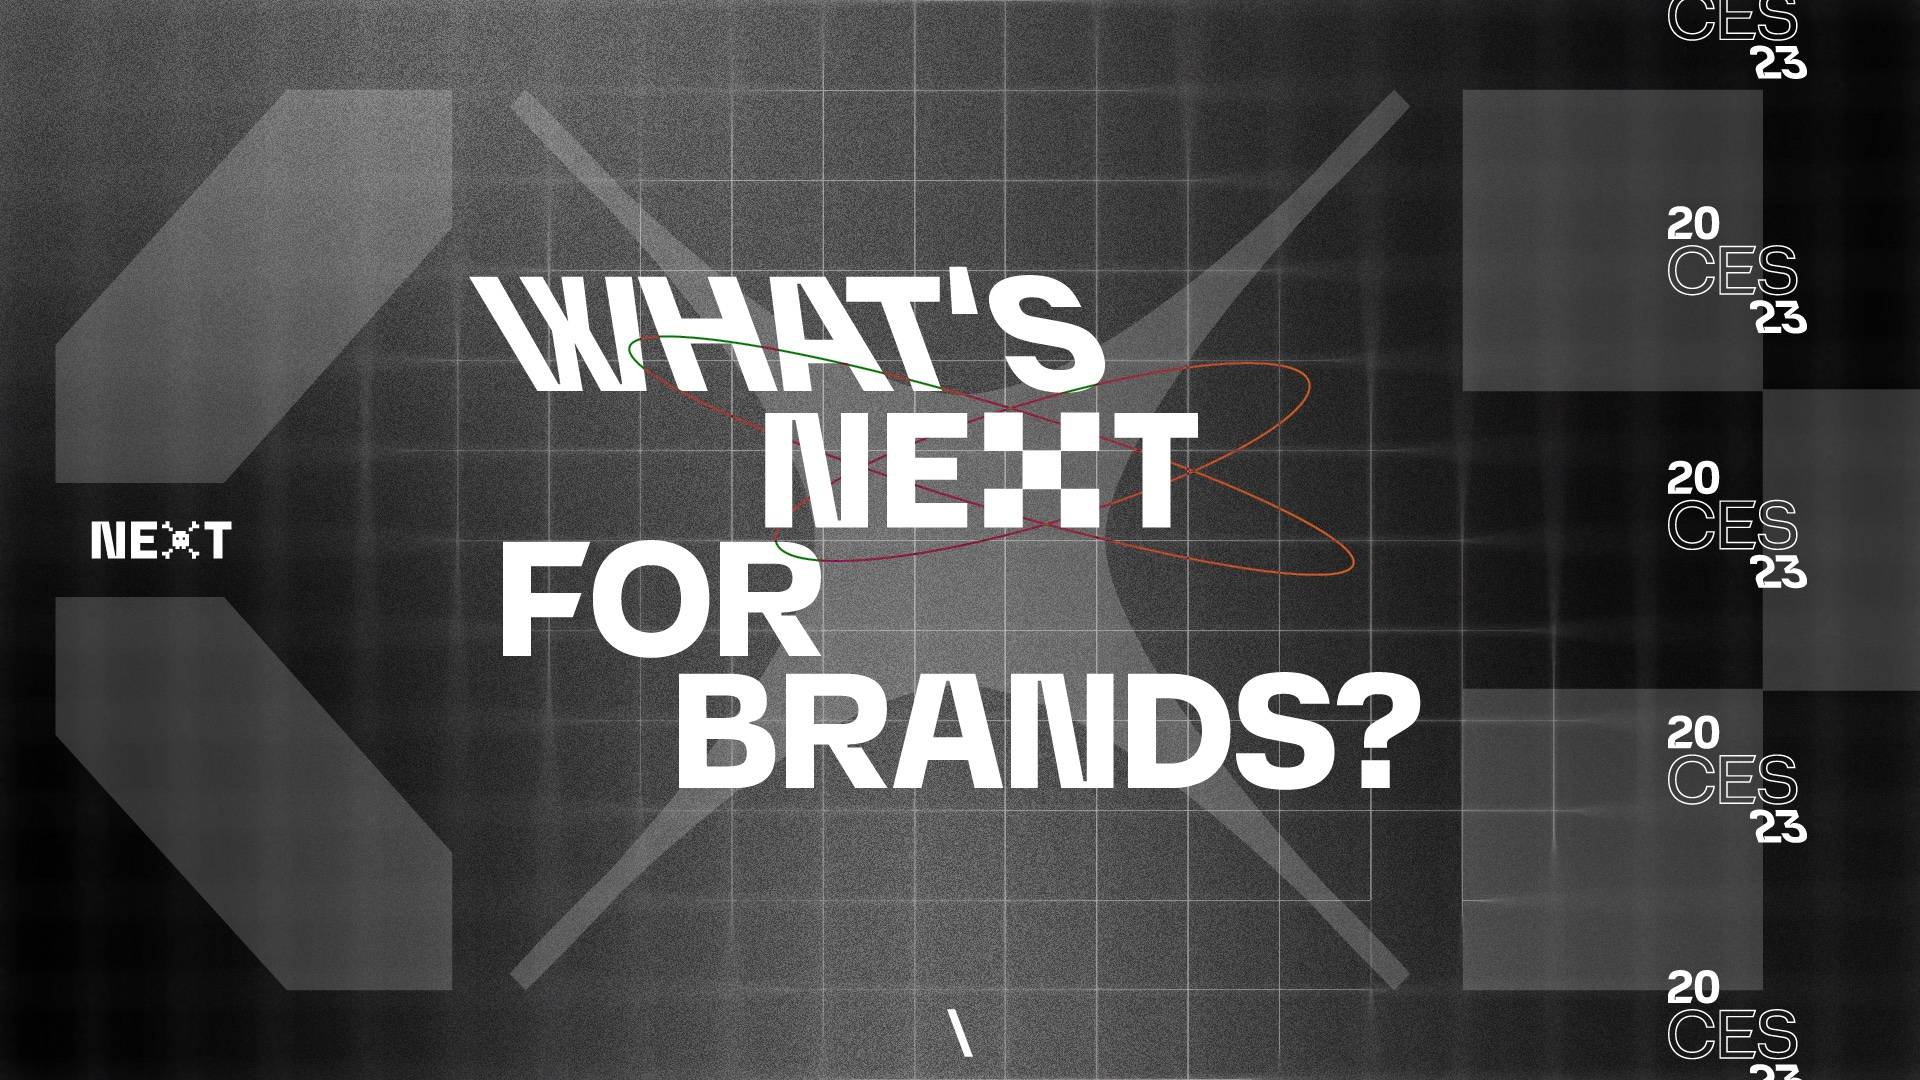 What's NEXT for brands?